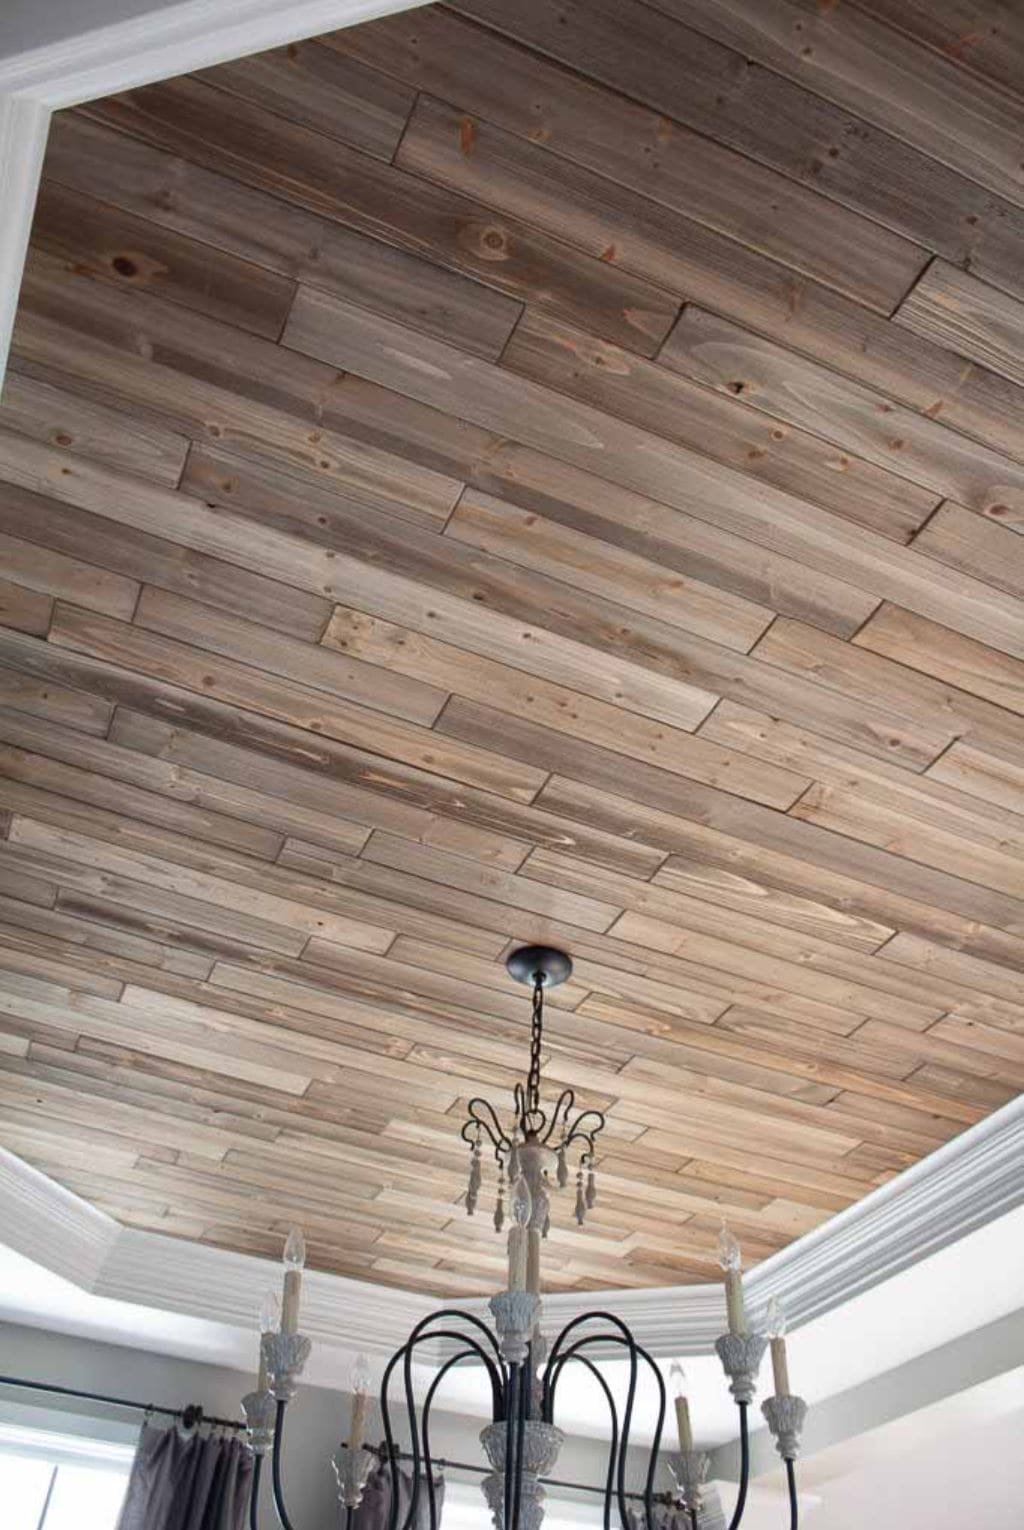 A ceiling planked with rustic wood planks.